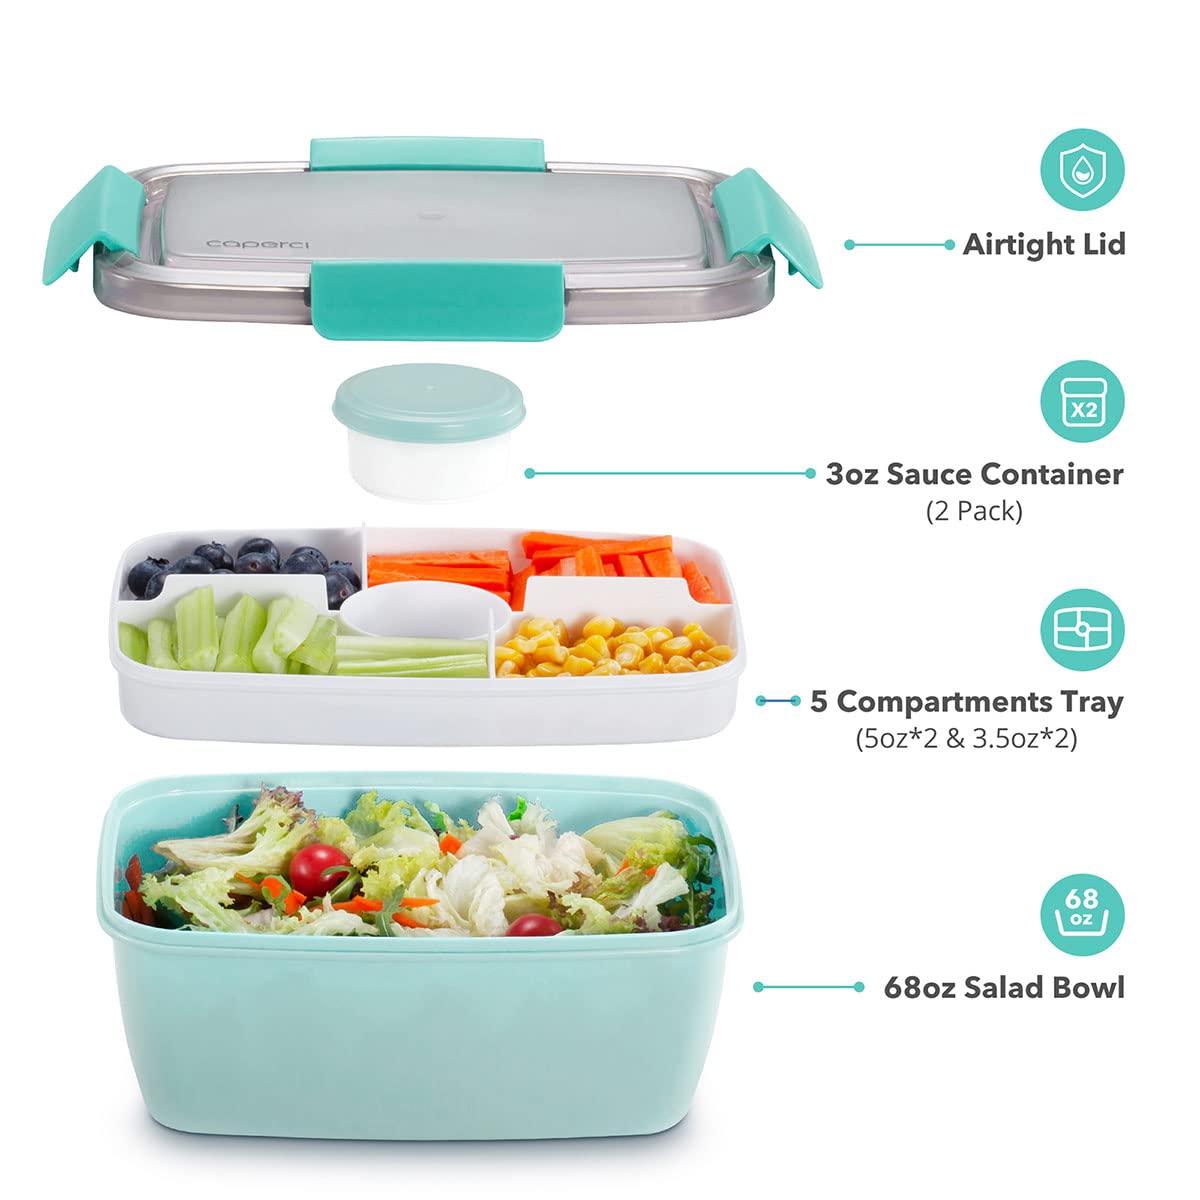 Caperci Large Salad Container Bowl for Lunch